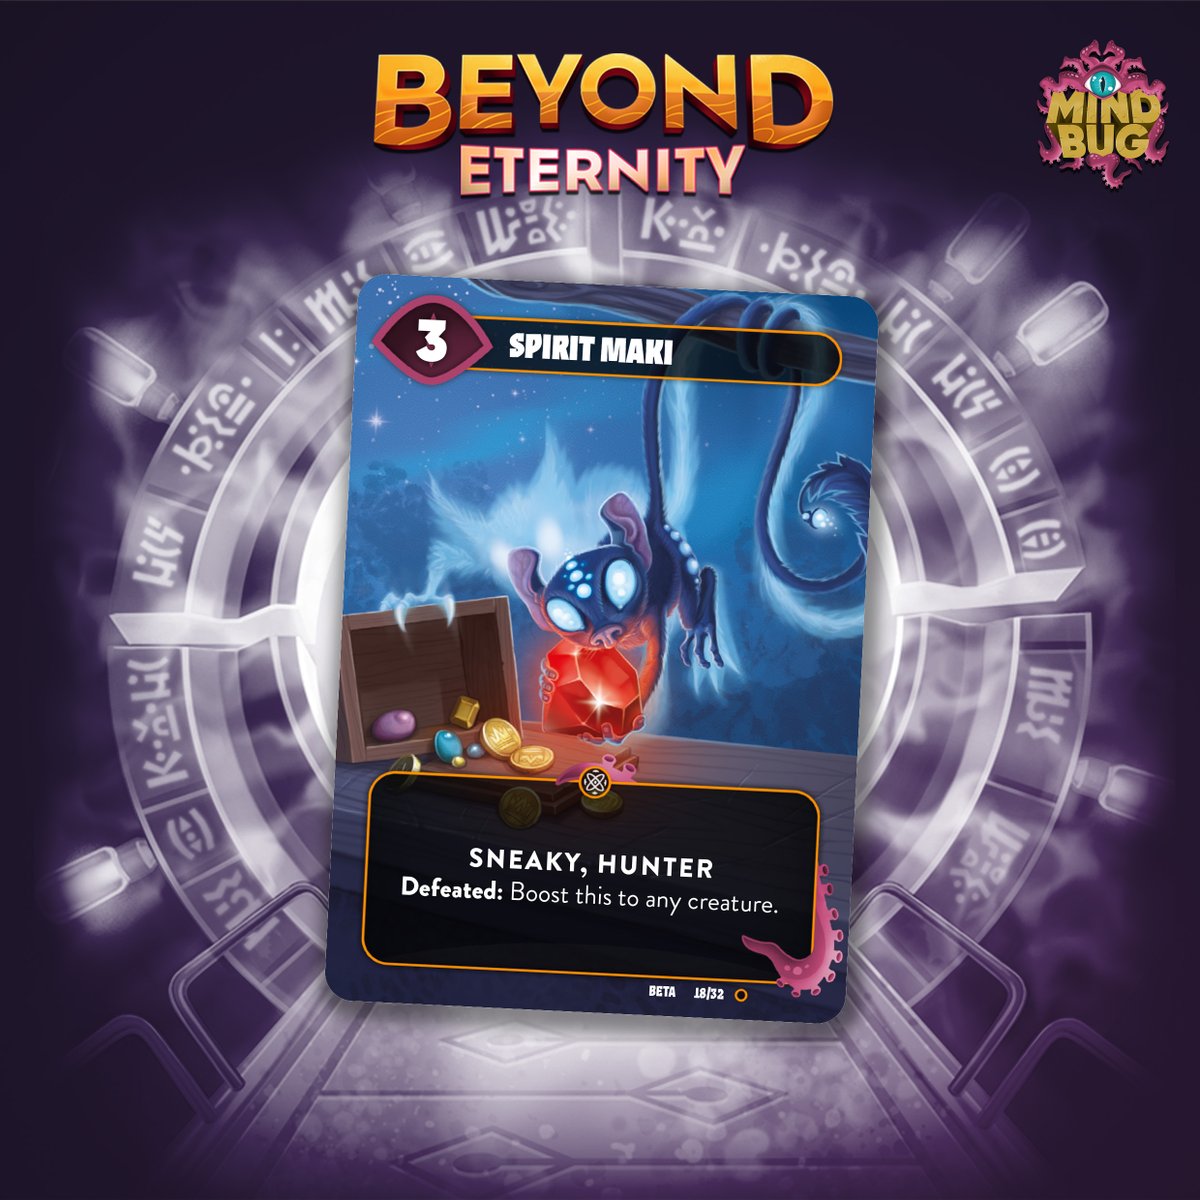 'This mischievous hunter is after your gems, but be careful - defeating it will only unleash its spirit.' Secure your own gem by supporting our campaign and get a chance to wield the power of the Spirit Maki! #mindbug #boardgames #cardgames #kickstarter kickstarter.com/projects/nerdl…